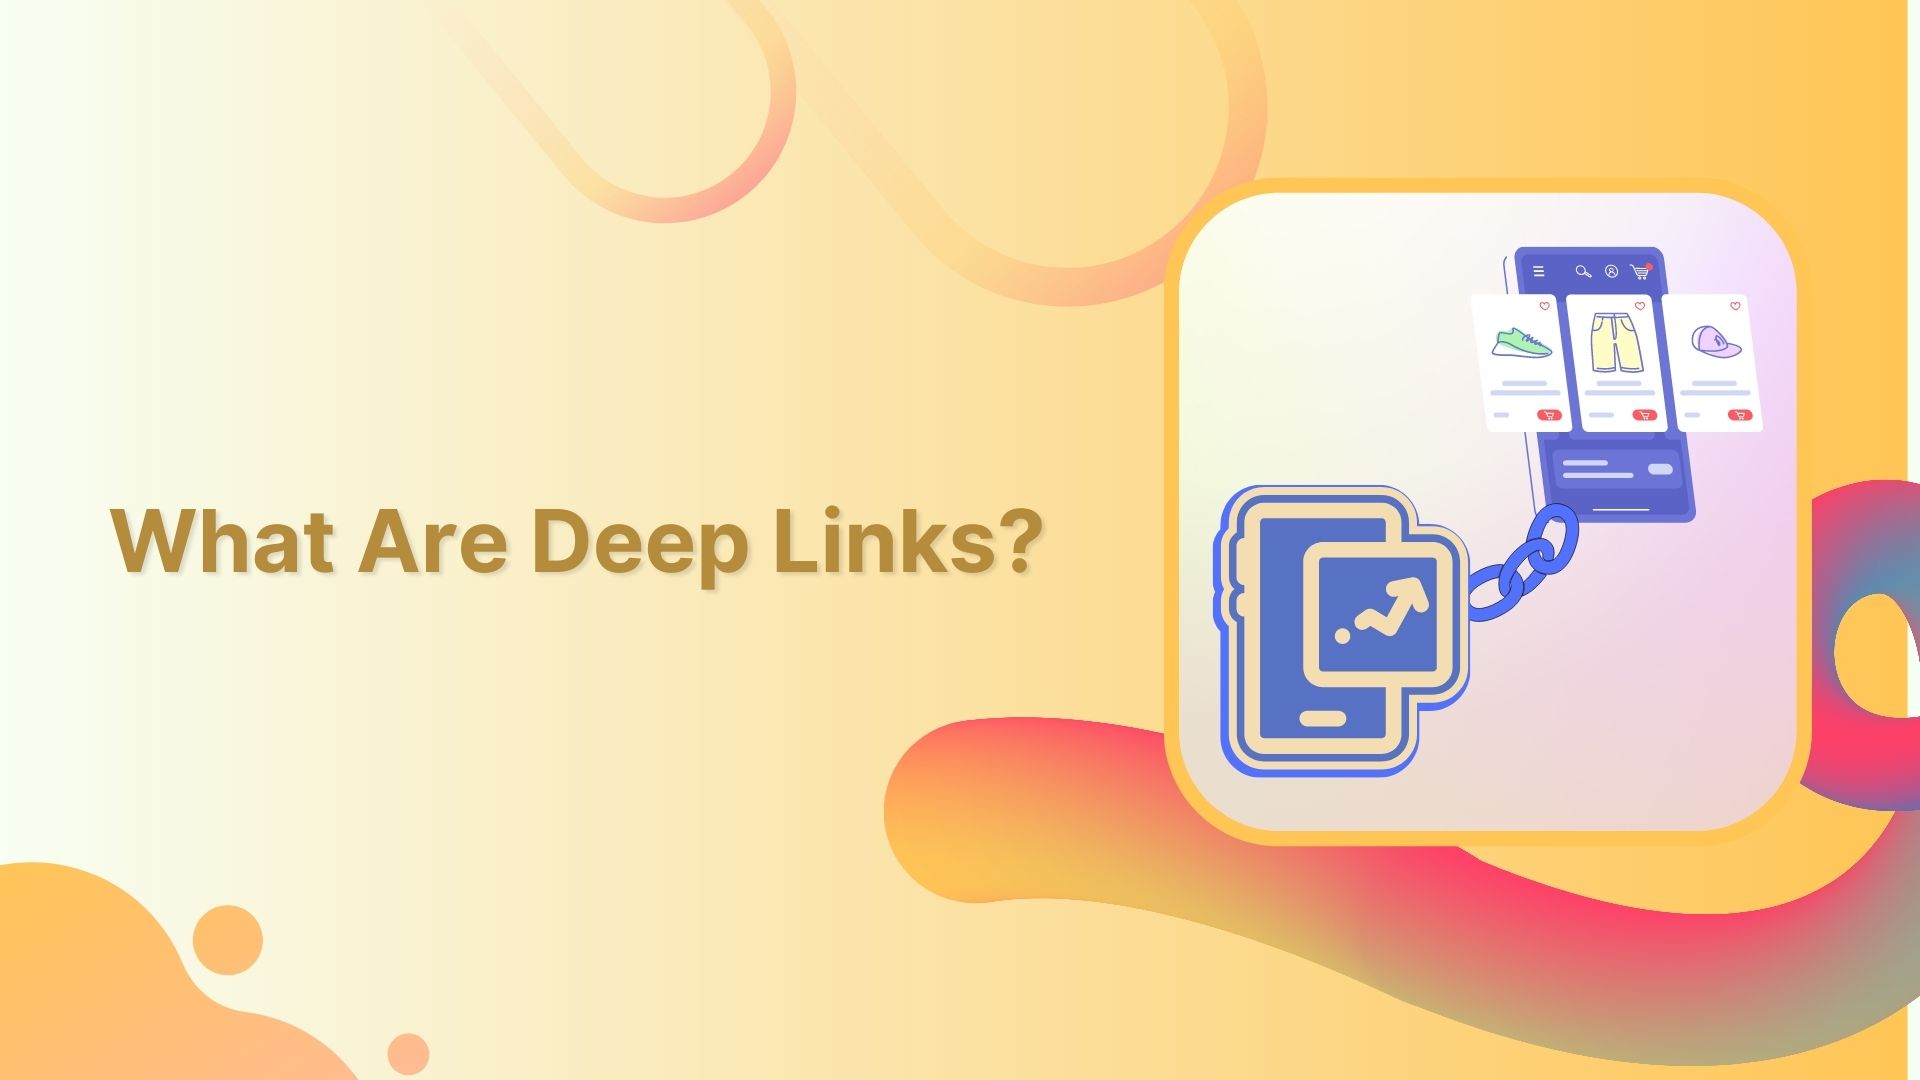 A Quick Guide To Deep Linking & Its Benefits